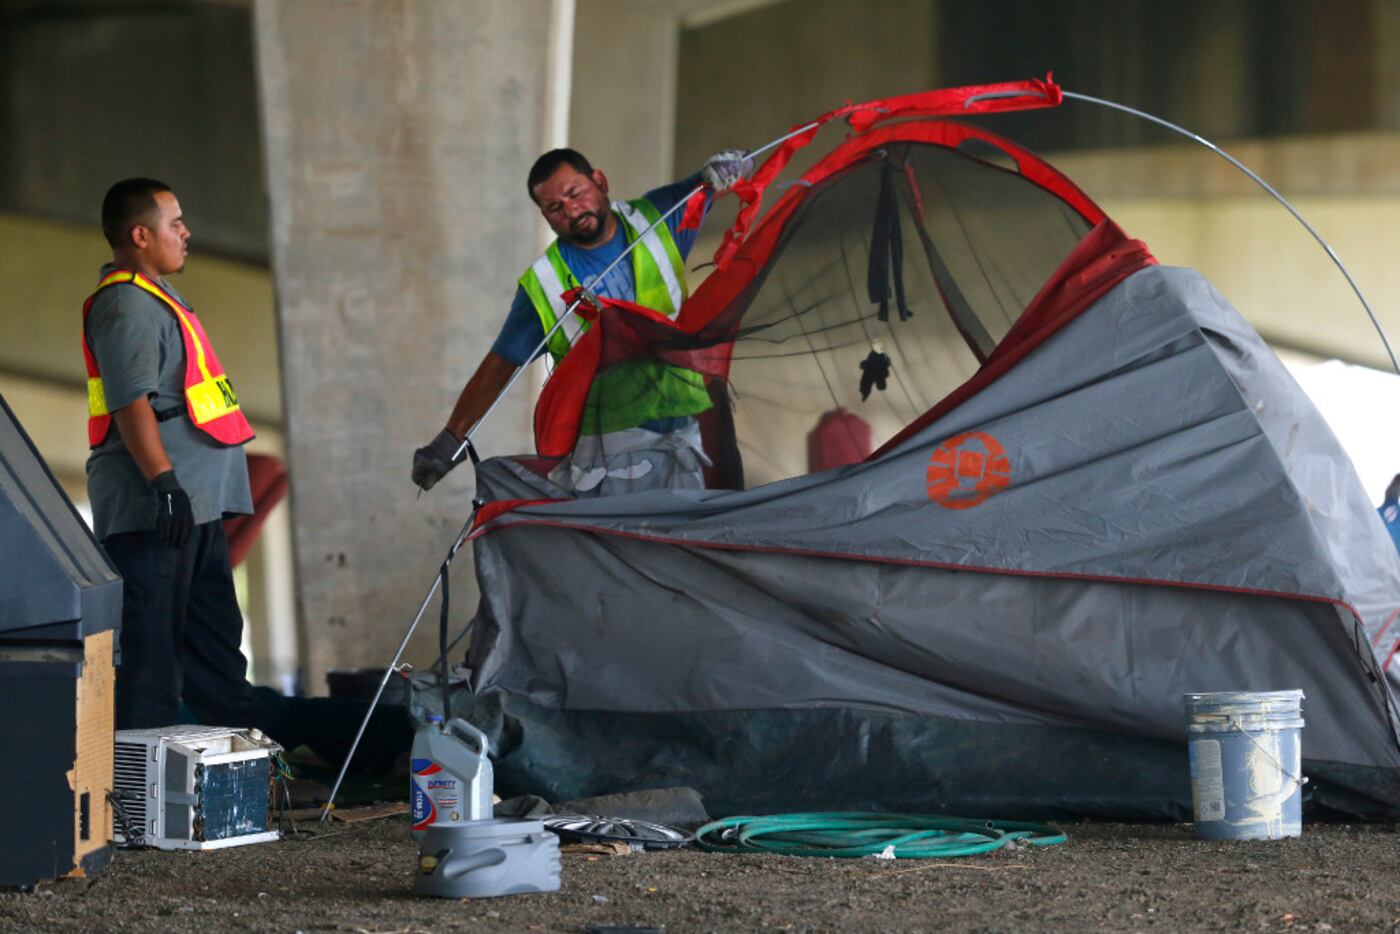 Hazardous material workers rip up a tent after the city closed a large homeless encampment...